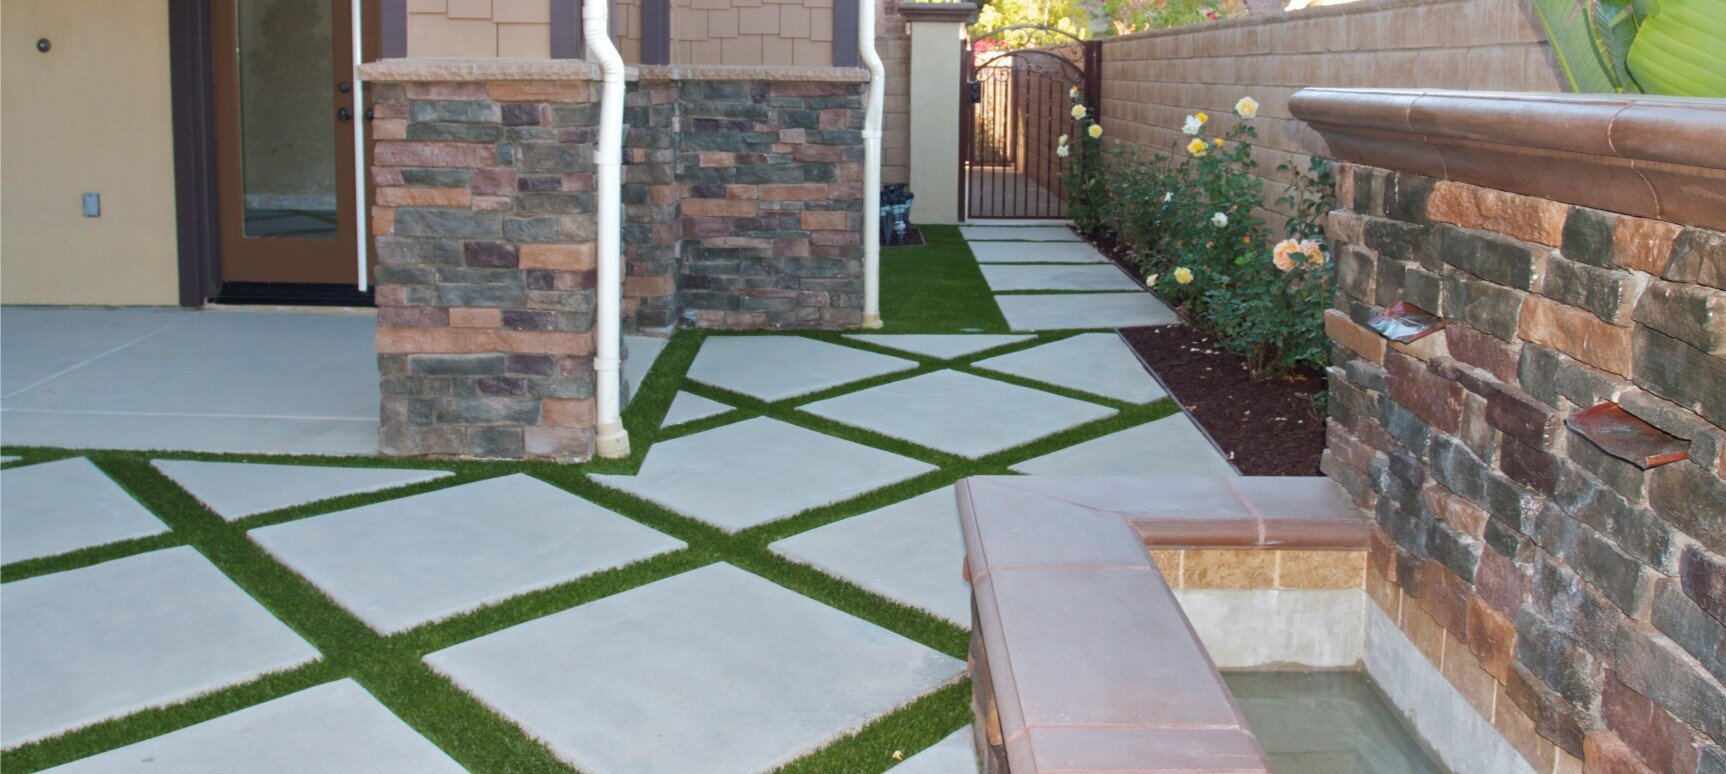 Lake Elsinore Artificial Grass & Pavers Services, Green-R Turf